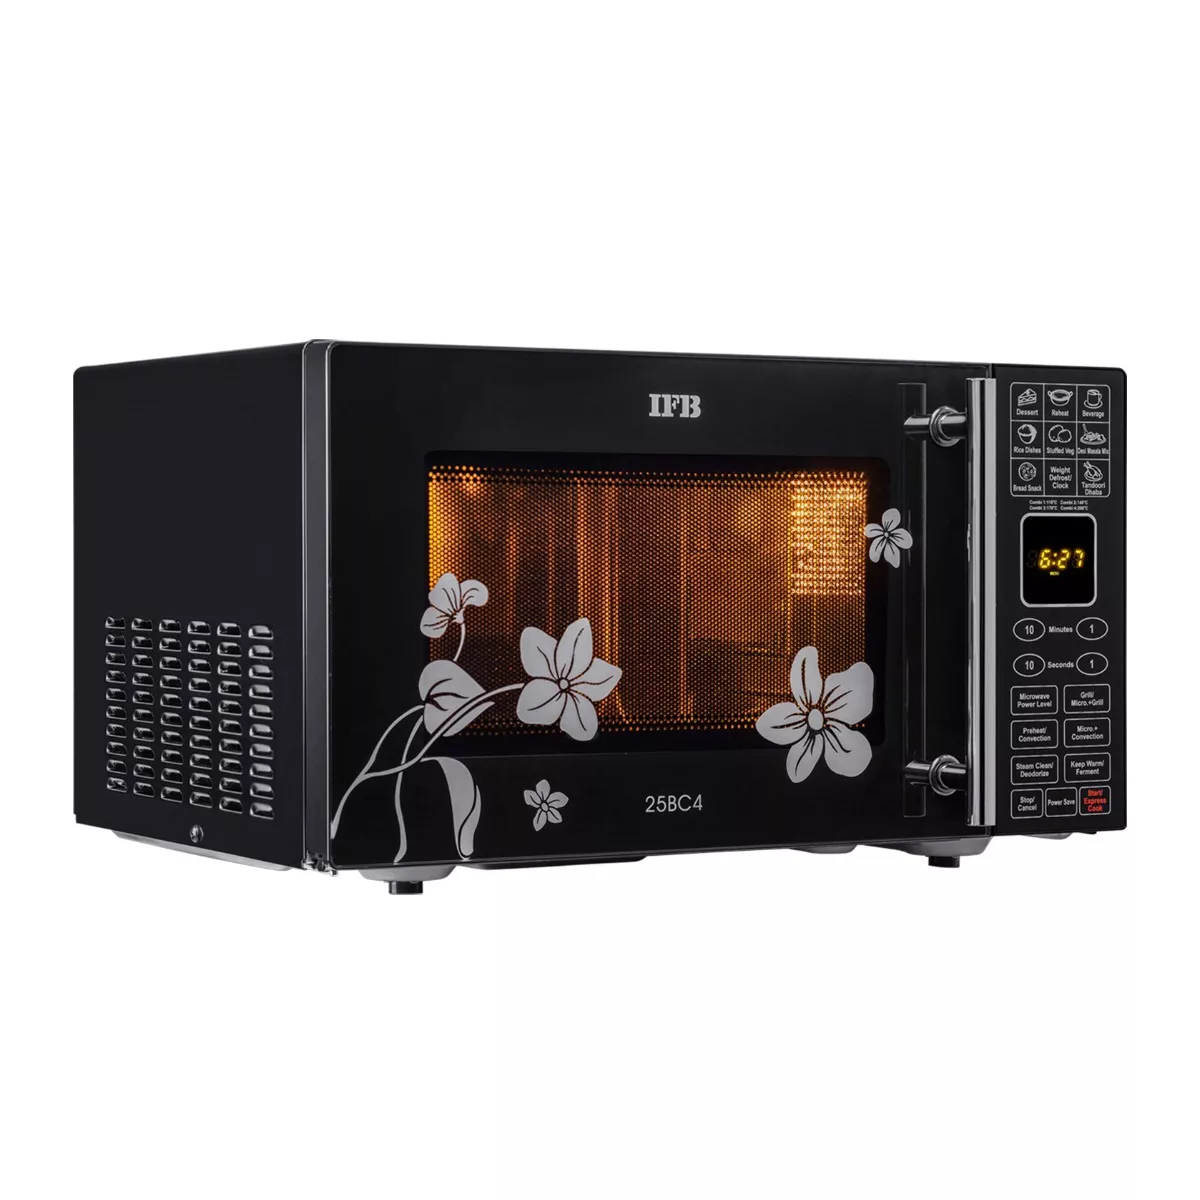 Ovens & Microwaves, Kitchen Appliances Recommended Products